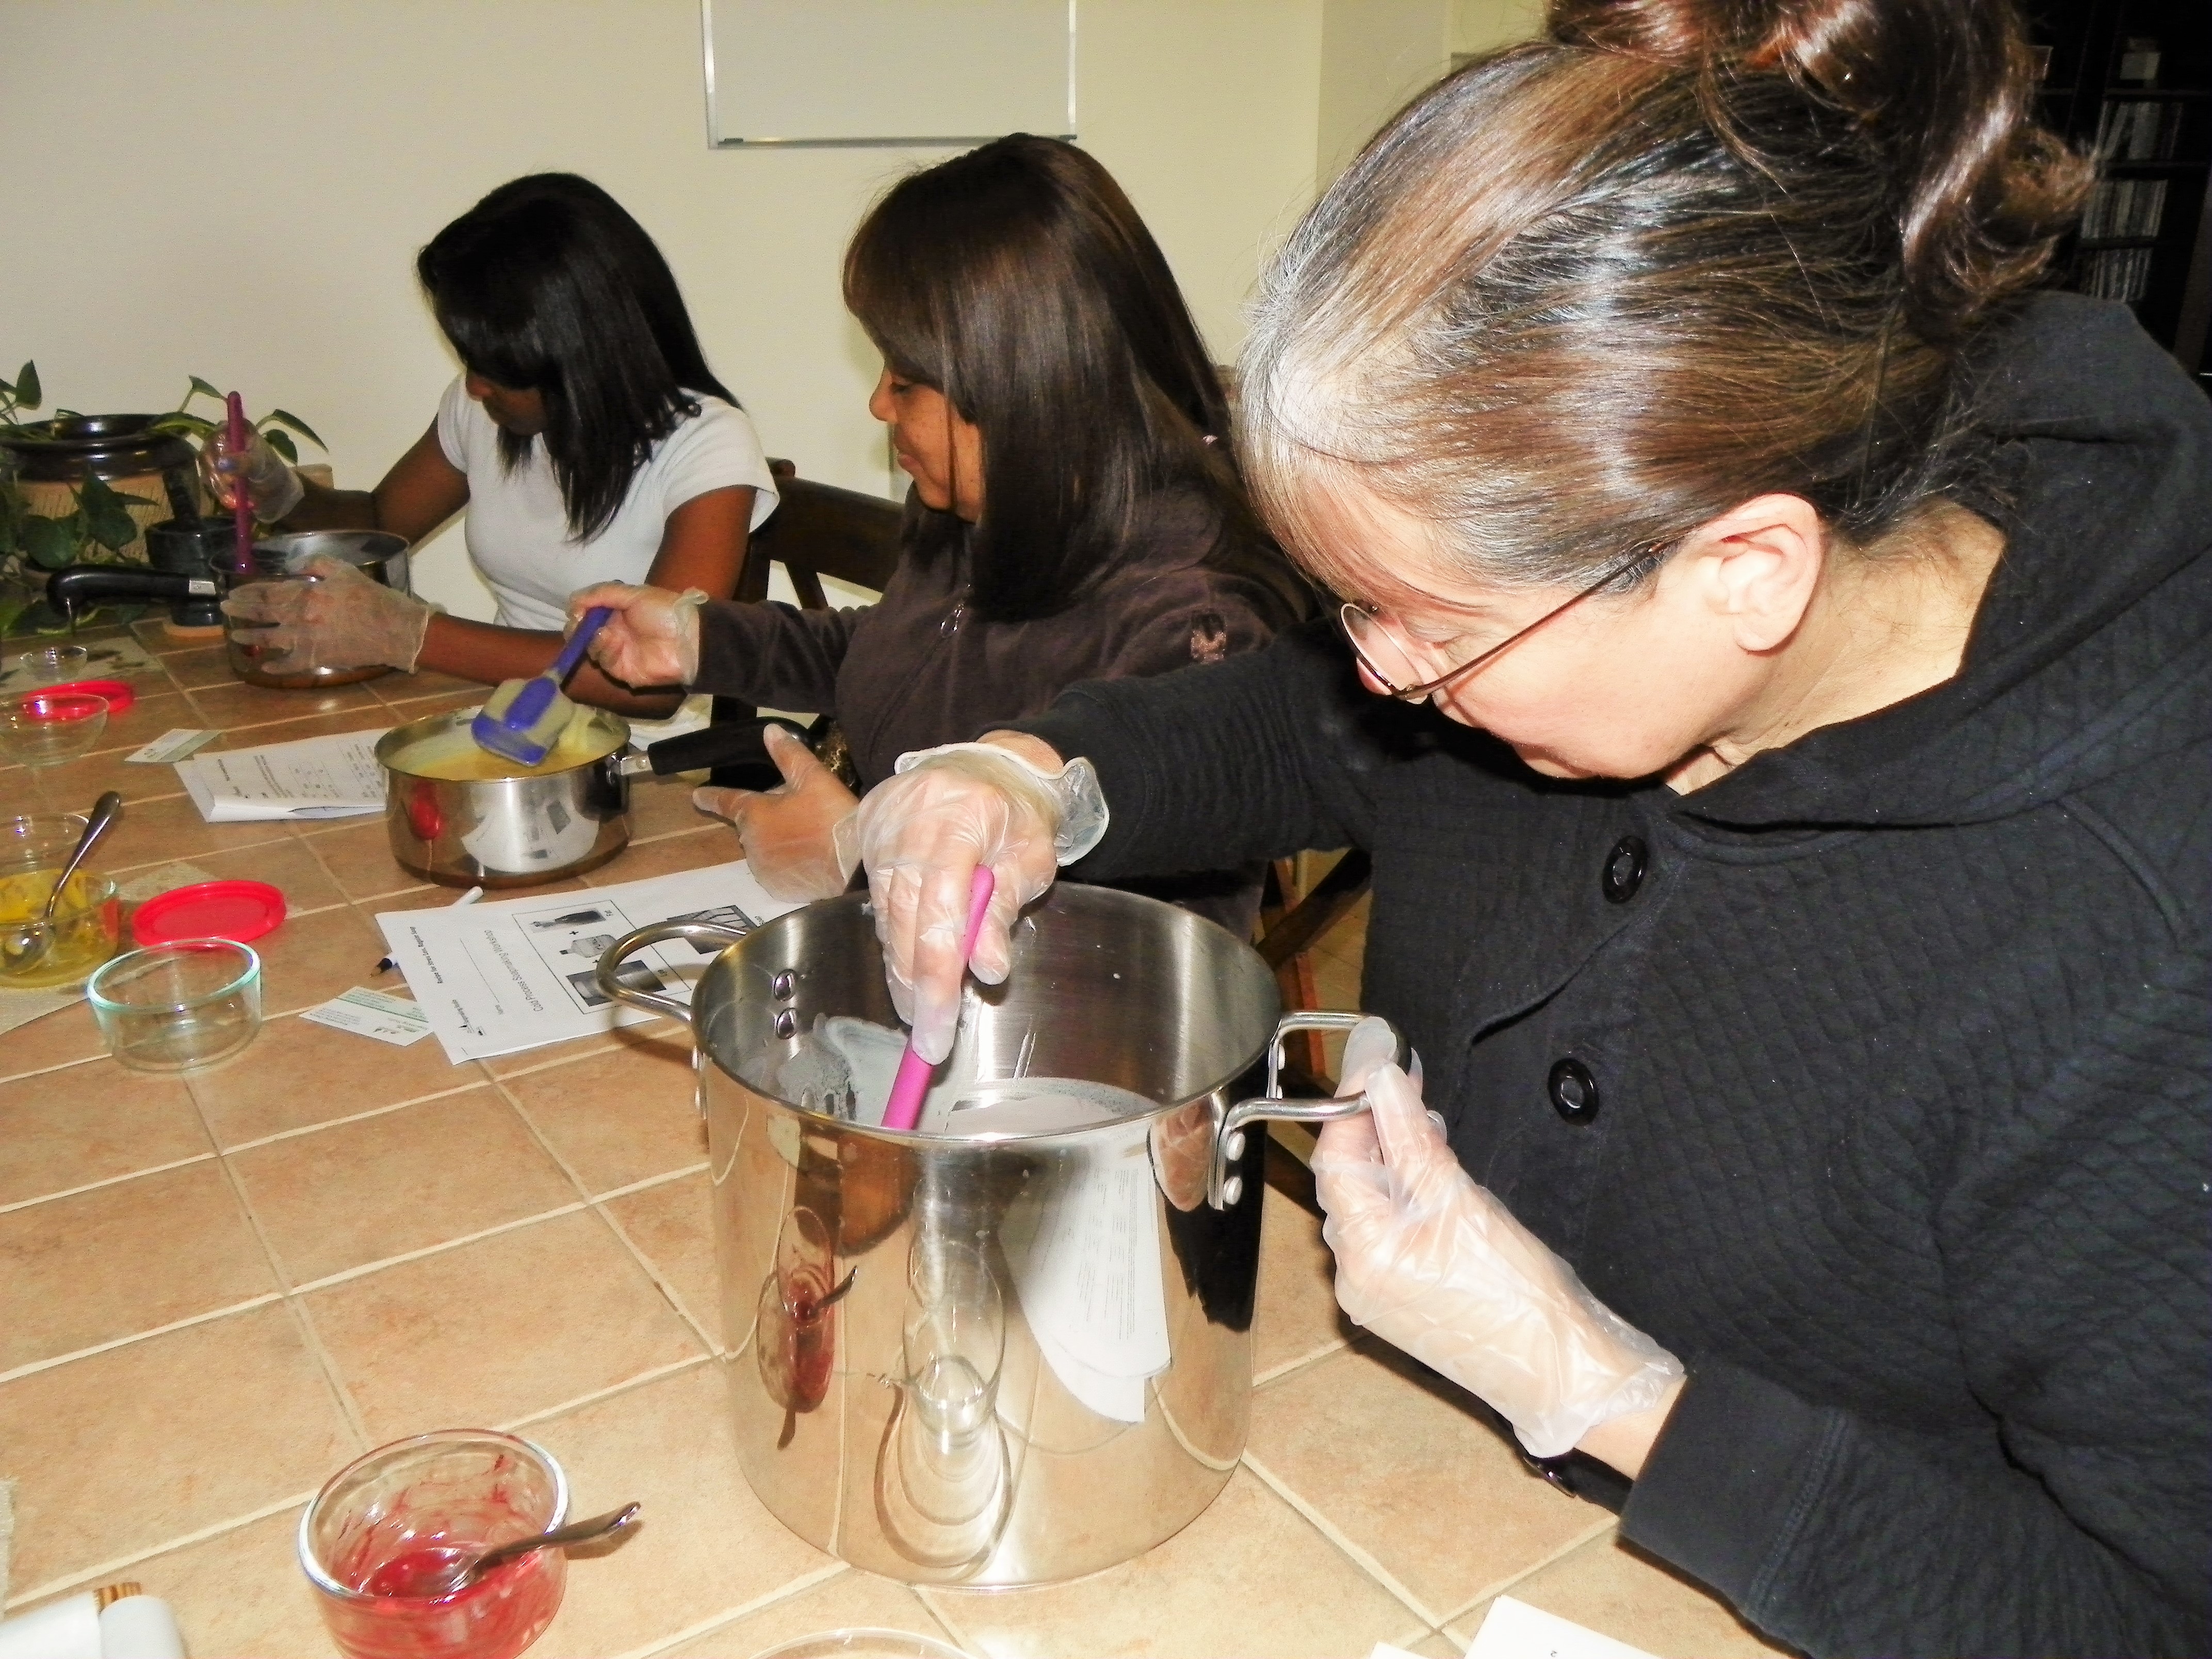 Student Jean Rowe making soap in a class at the Soapmaking Studio, in Lemon Grove.